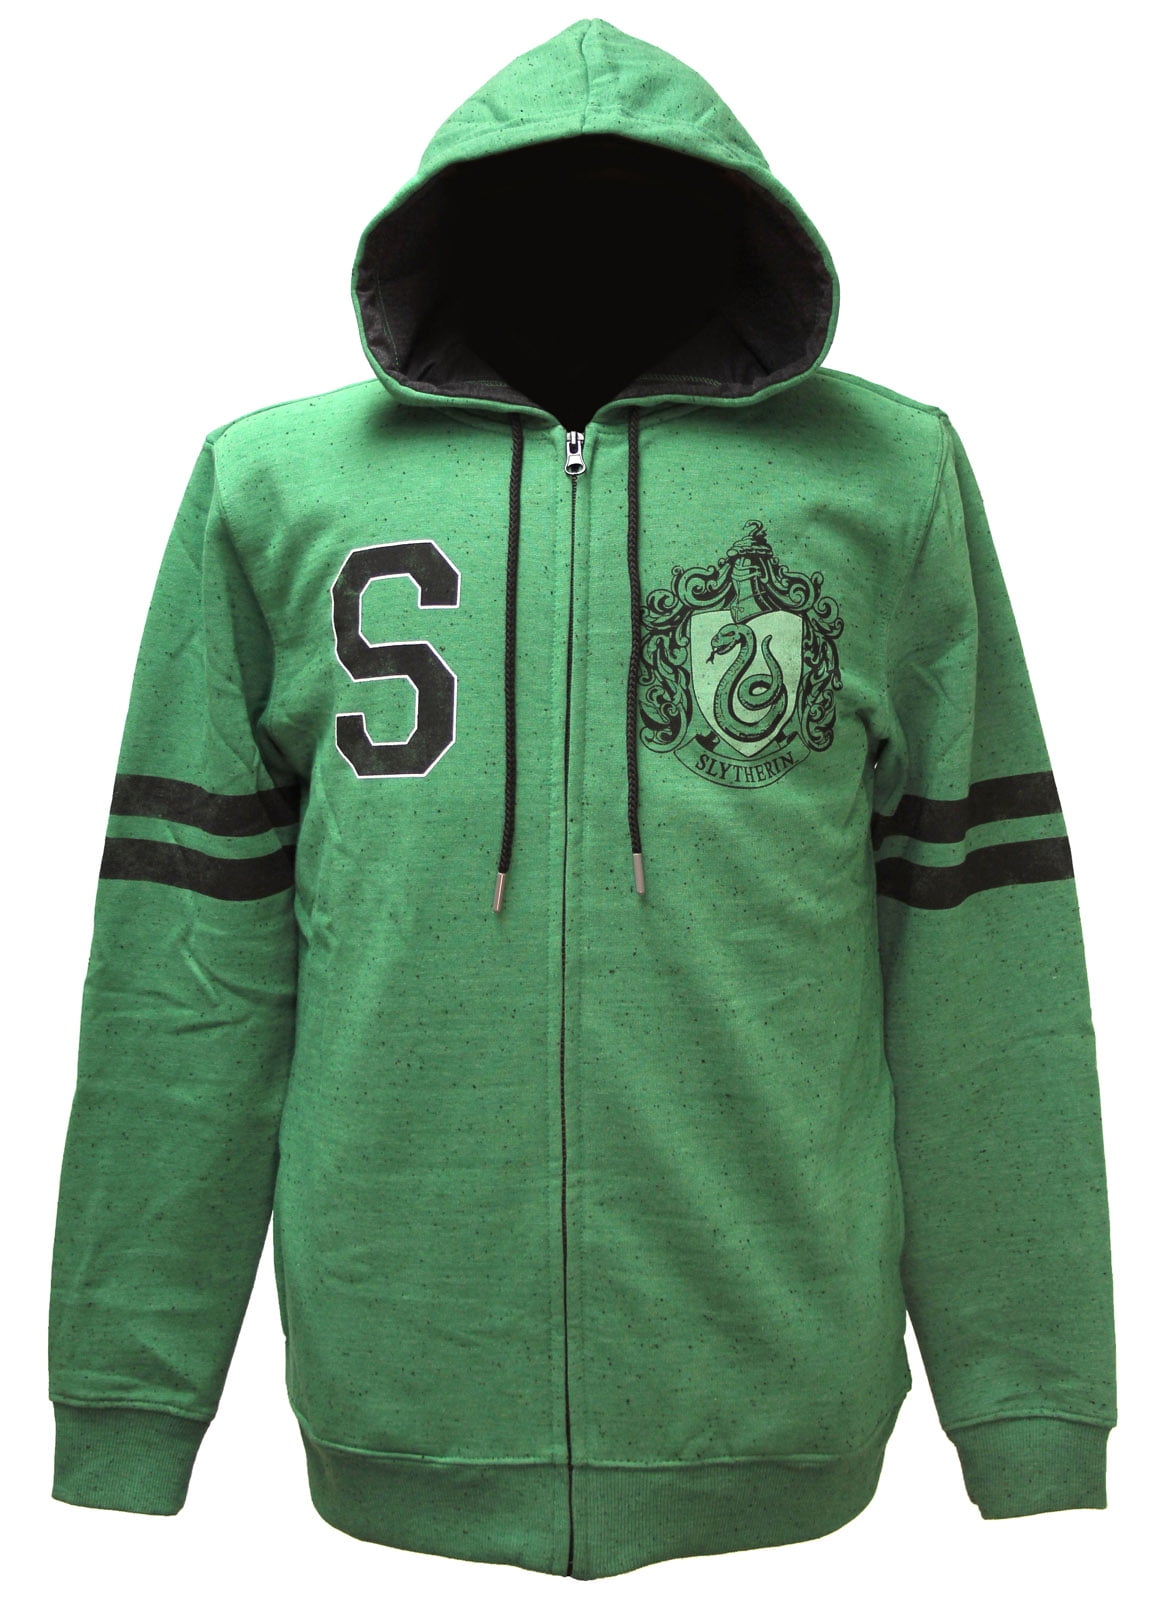 Wizarding World of Harry Potter Slytherin Hoodie Mens Large Green Hogwarts